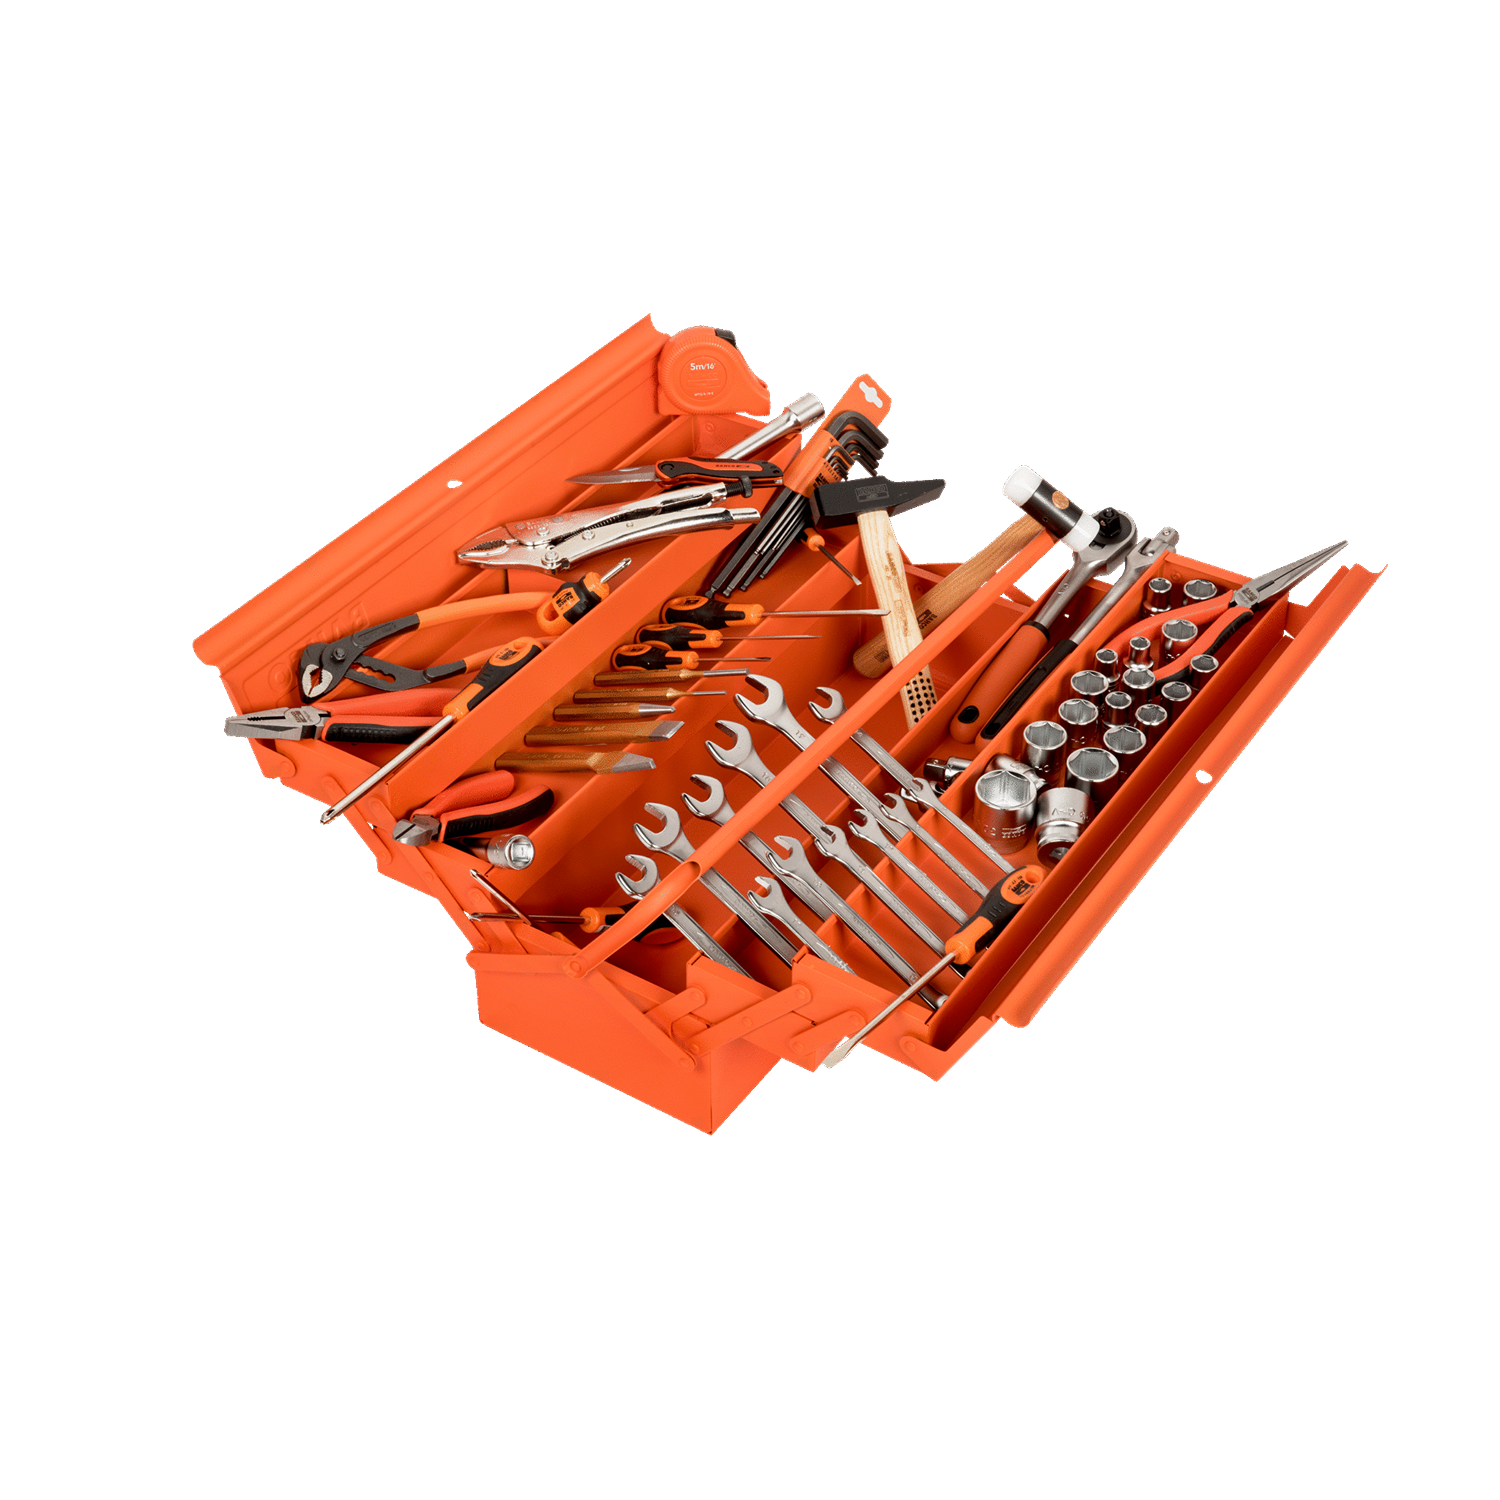 BAHCO 3149-ORTS1 Cantilever Metallic Box General Purpose Tool Kit - Premium Tool Kit from BAHCO - Shop now at Yew Aik.